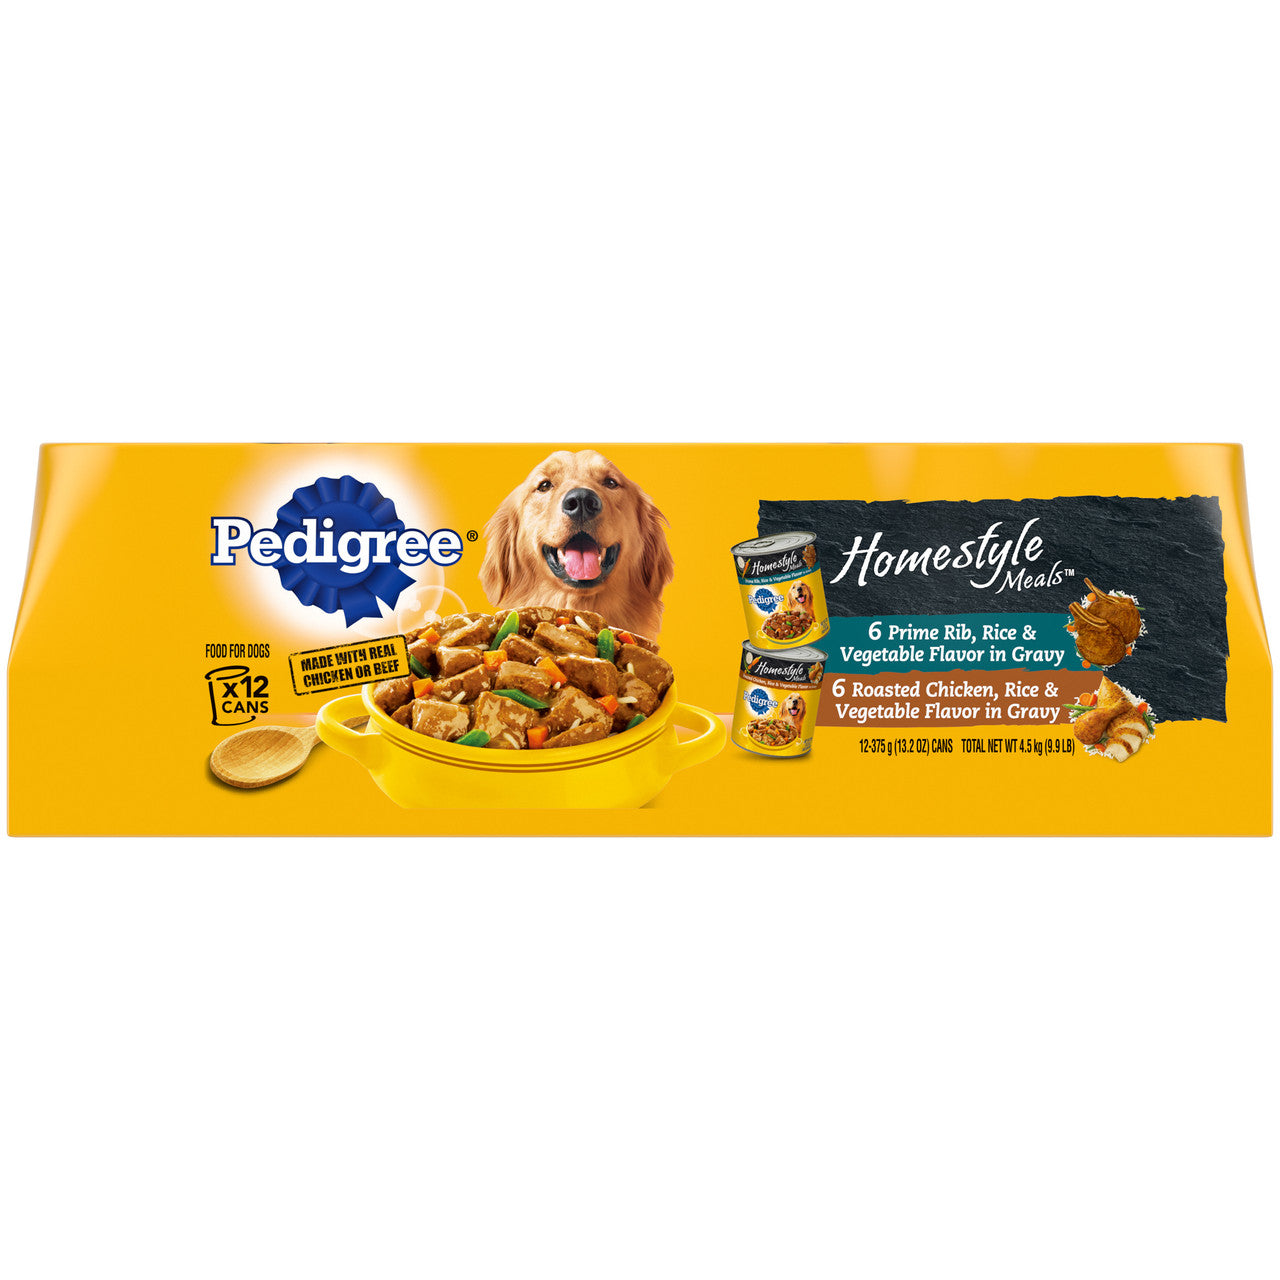 Pedigree Homestyle Meals Adult Wet Dog Food Variety Pack (Prime Rib, Roasted Chicken) 13.2oz 12pk